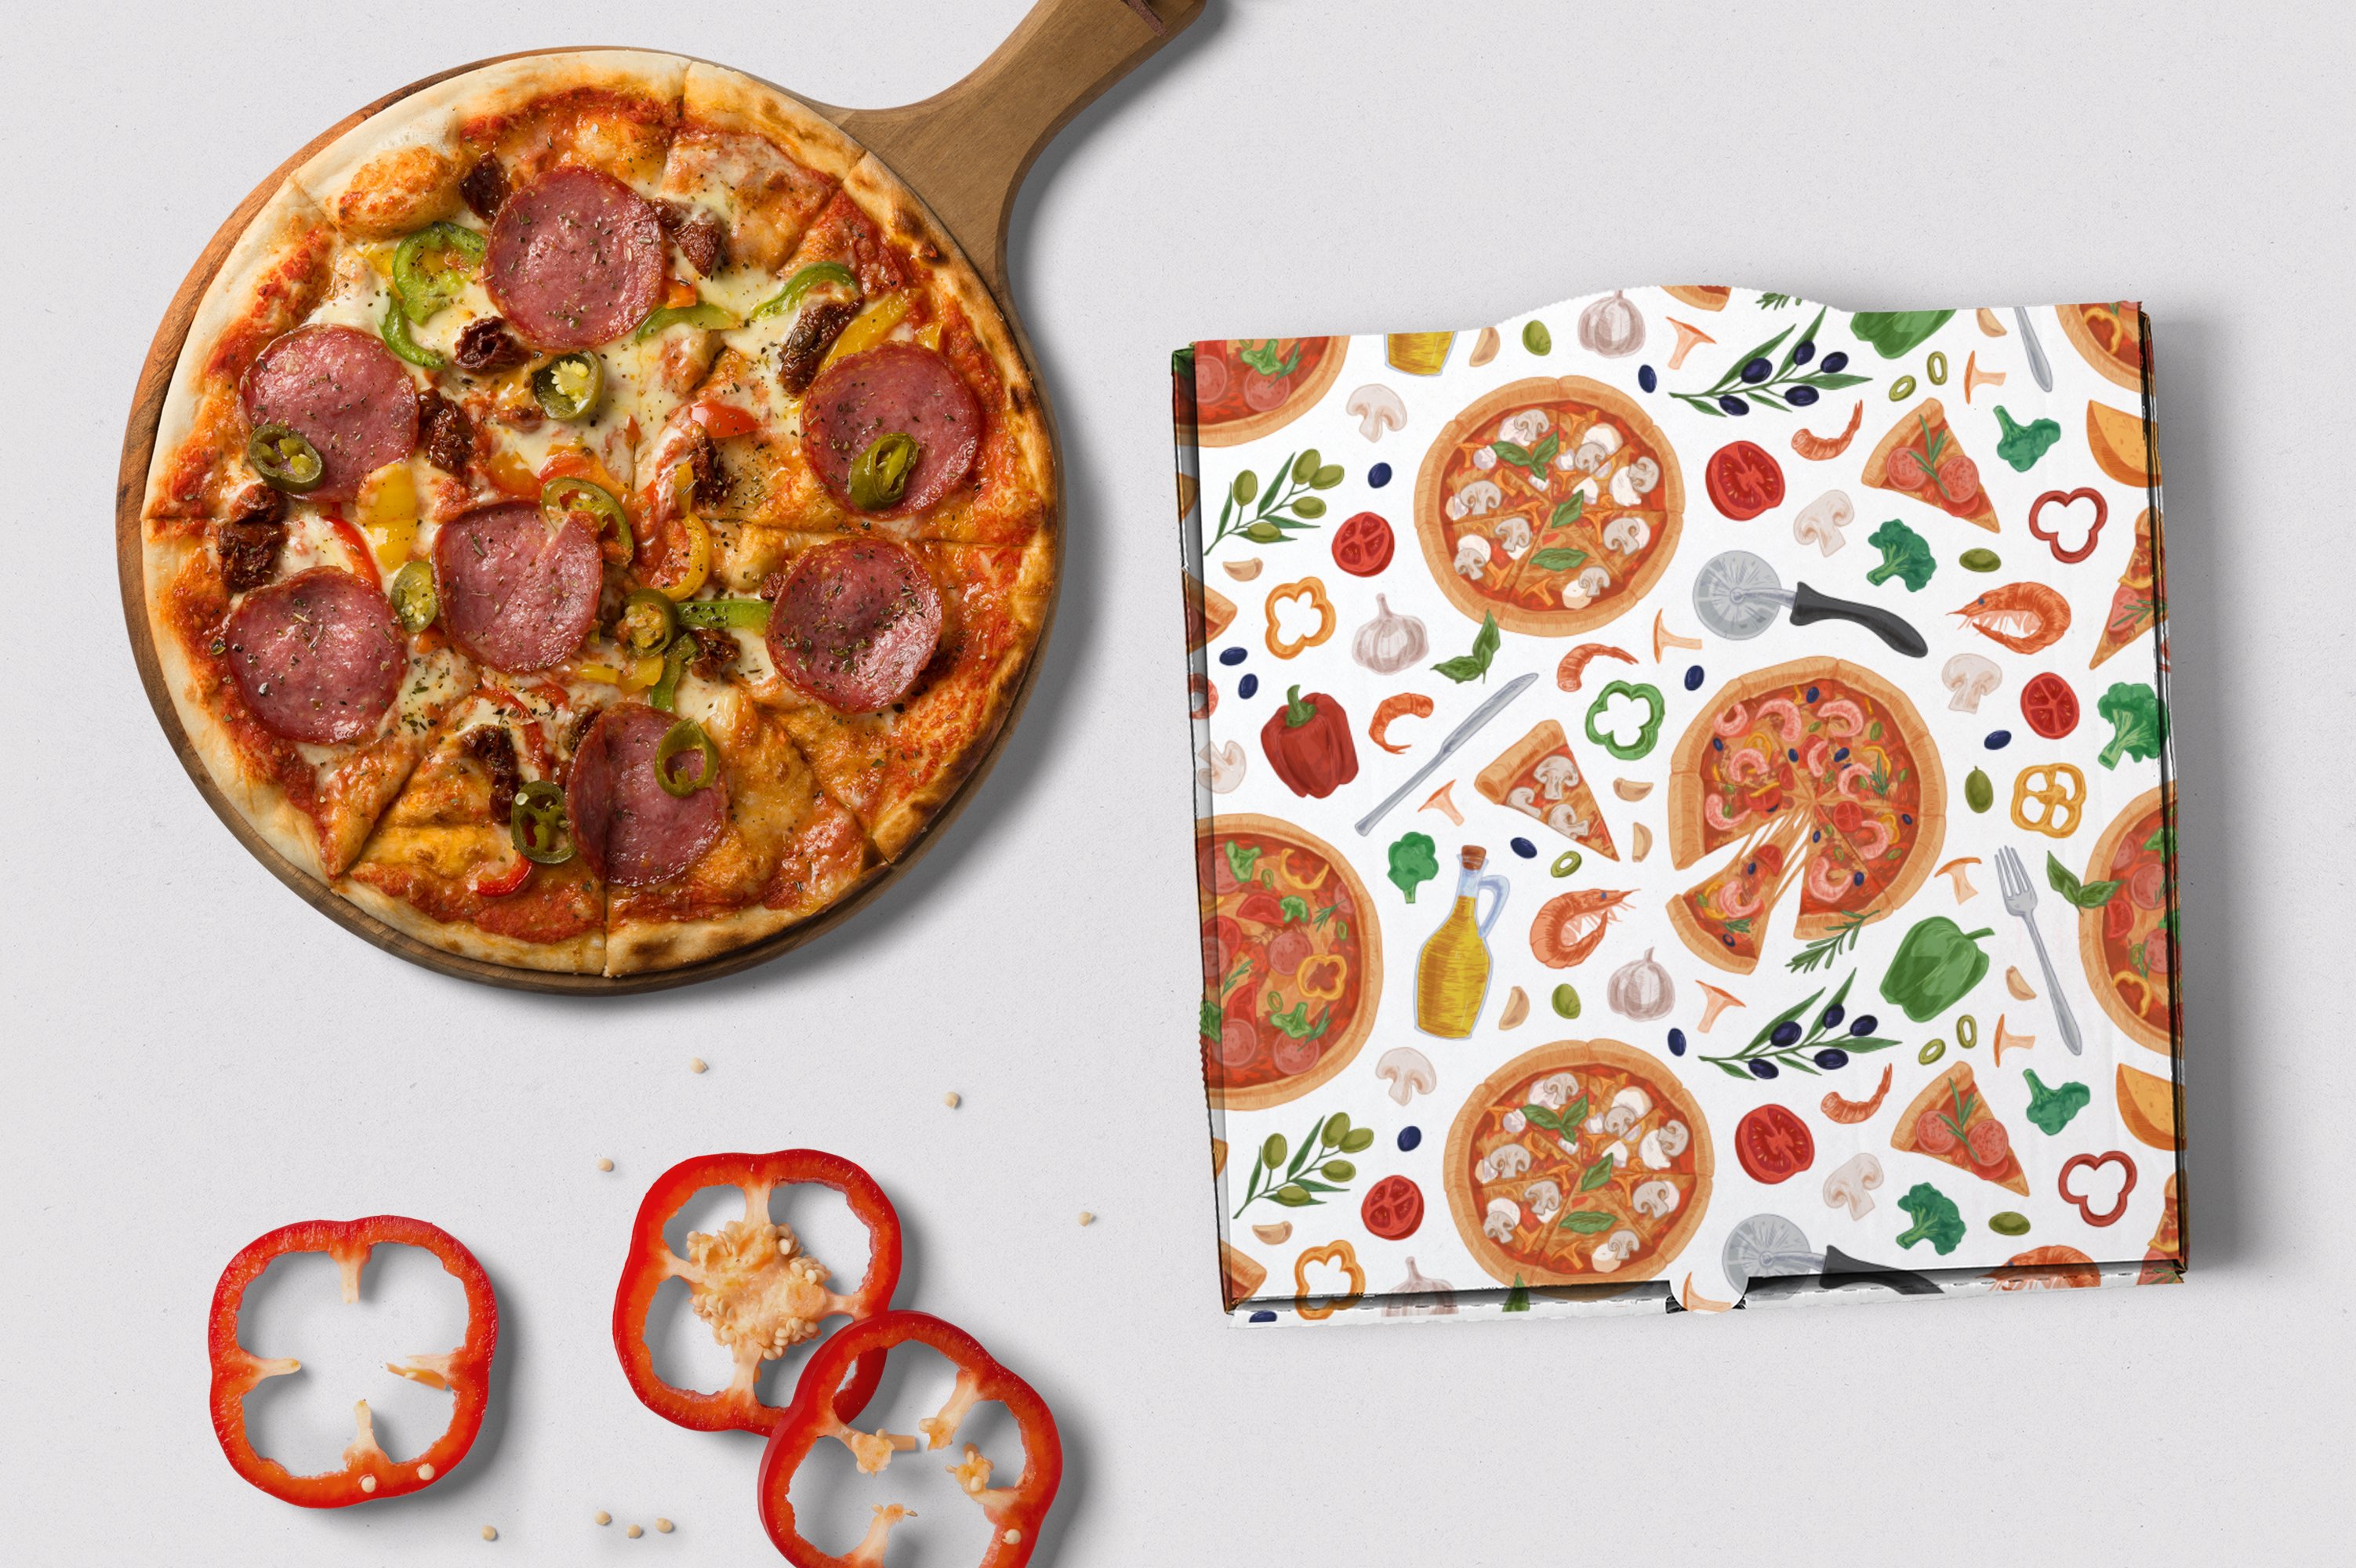 pizza and pizza ingridients patterns 6 888